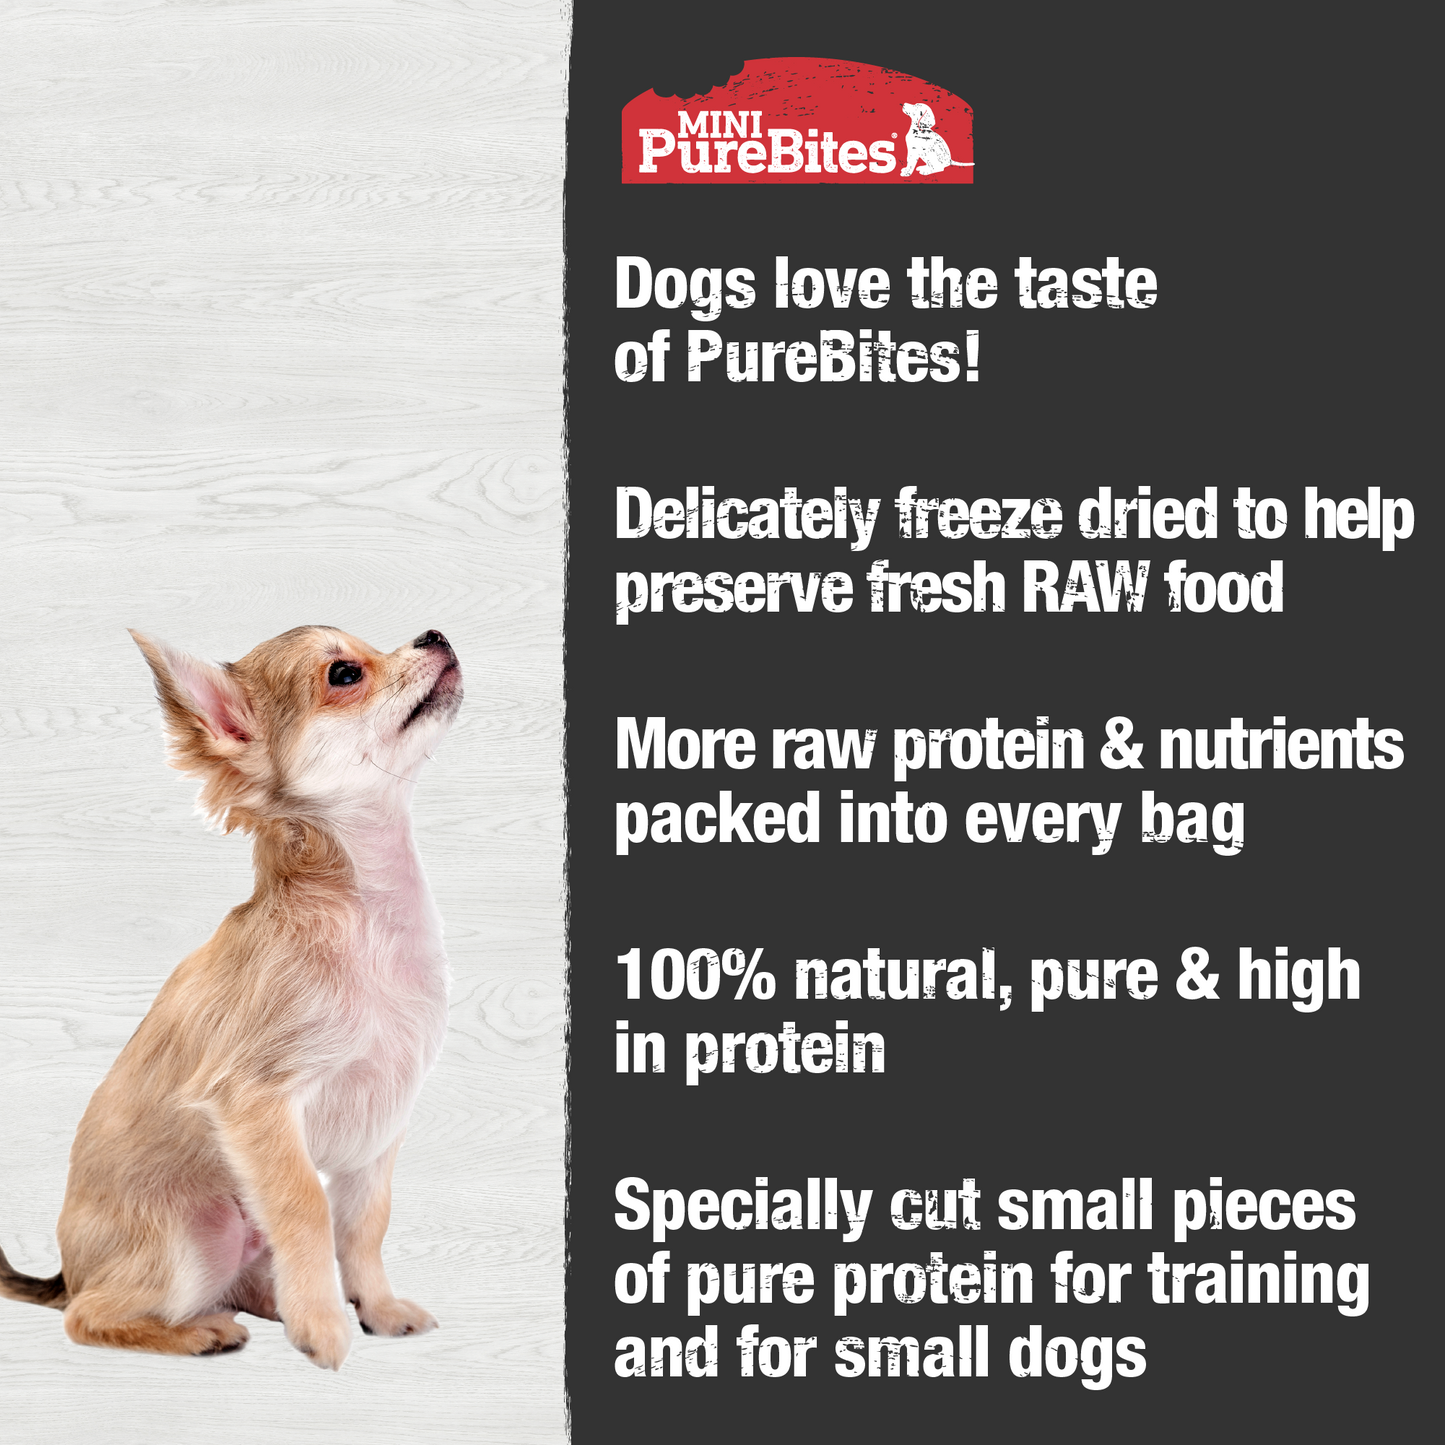 Made fresh & pure means more RAW protein and nutrients packed into every bag. Our chicken breast  is freeze dried to help preserve its RAW taste, and nutrition, and mirror a dog’s ancestral diet